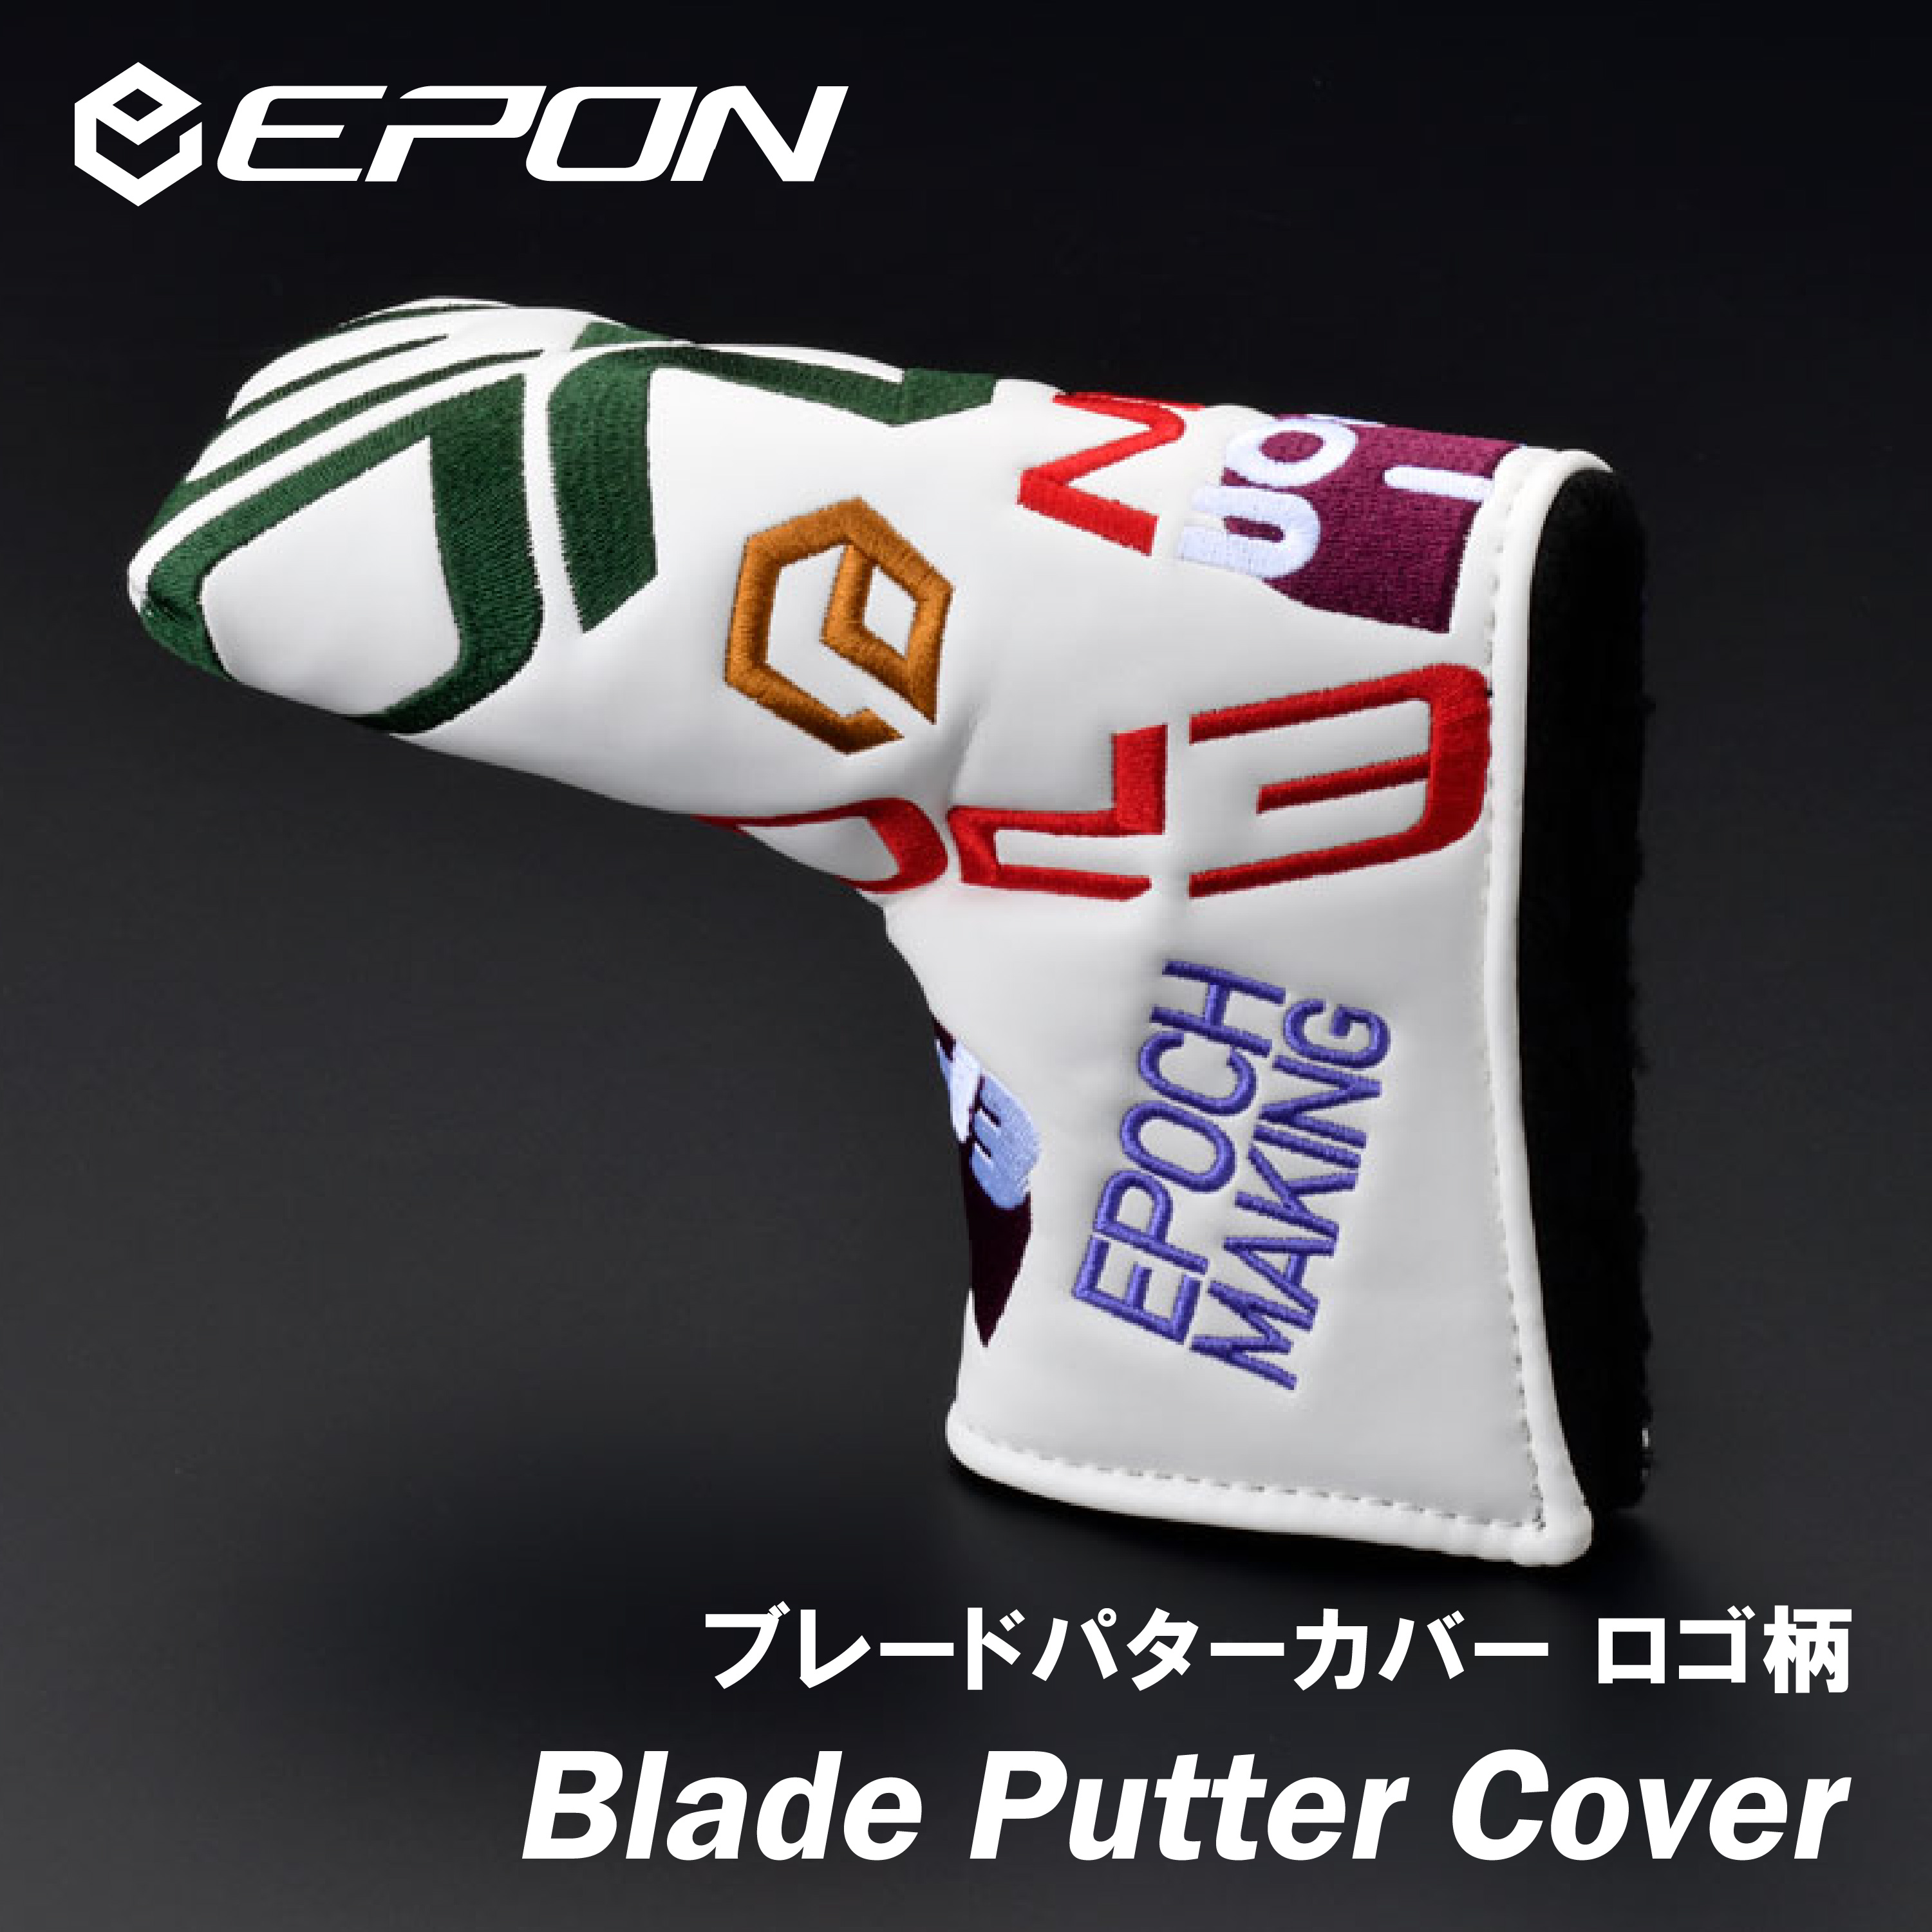 EPON Blade Putter Cover ロゴ柄